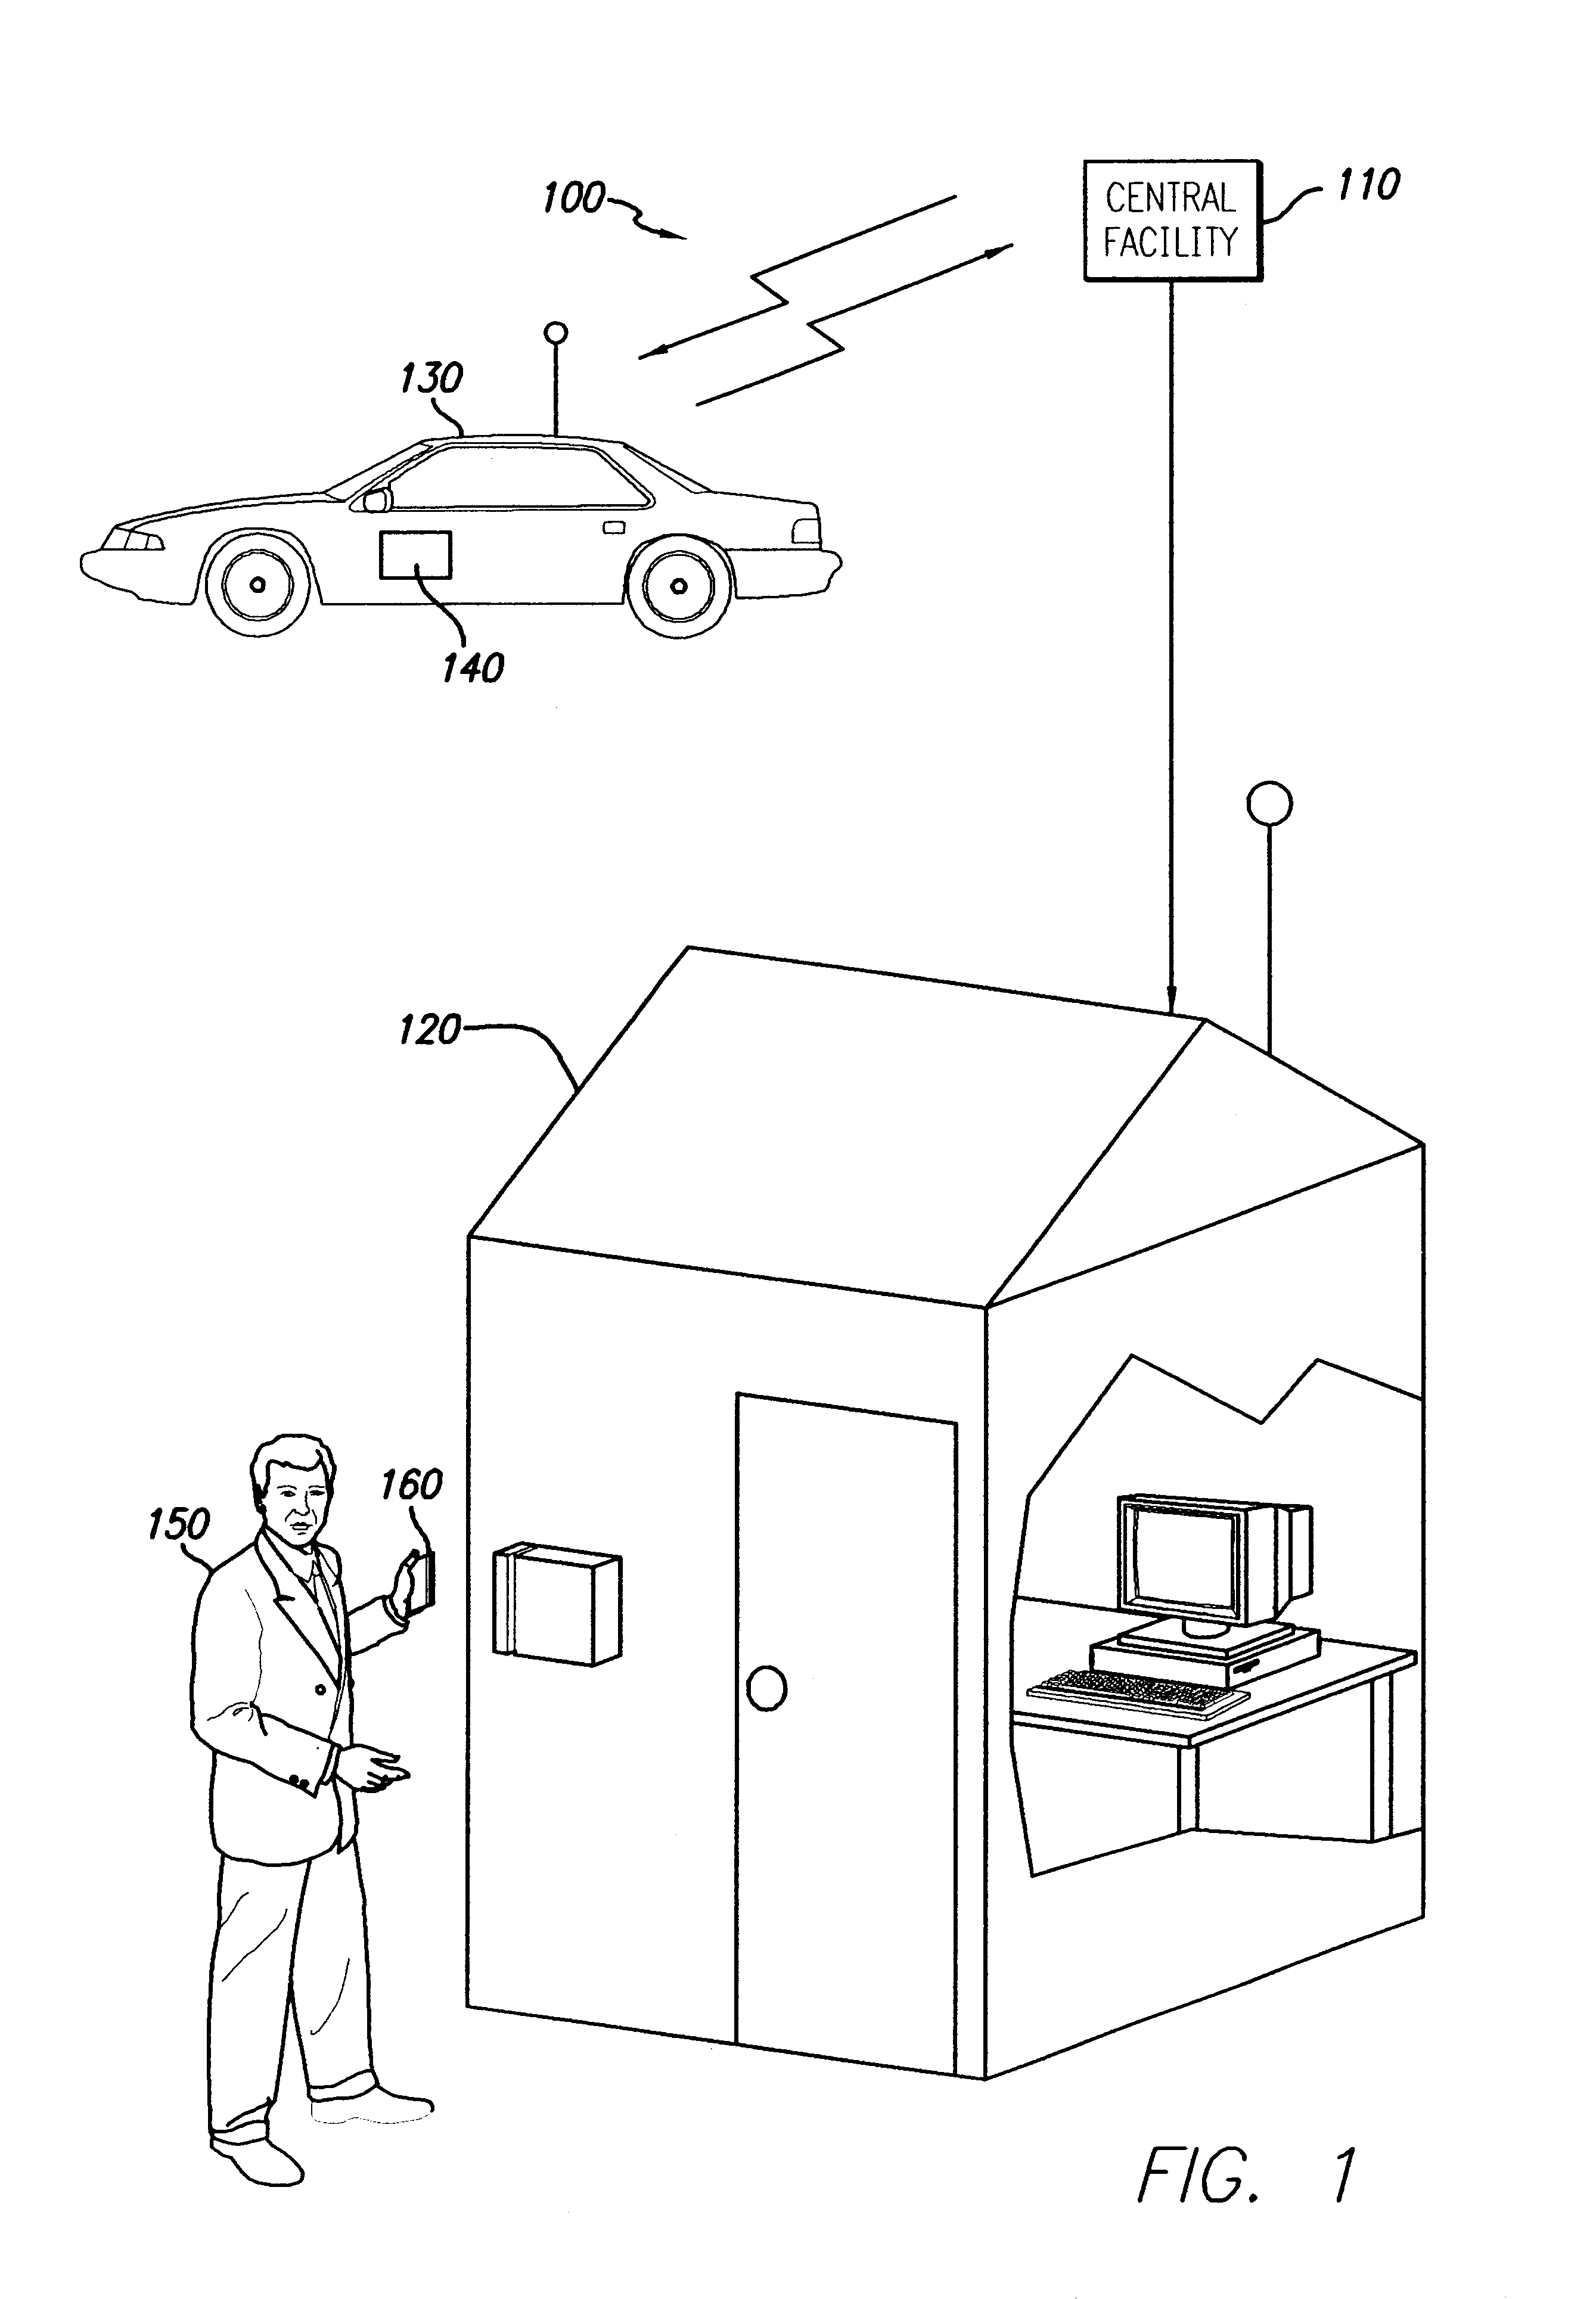 Method for efficient vehicle allocation in vehicle sharing system